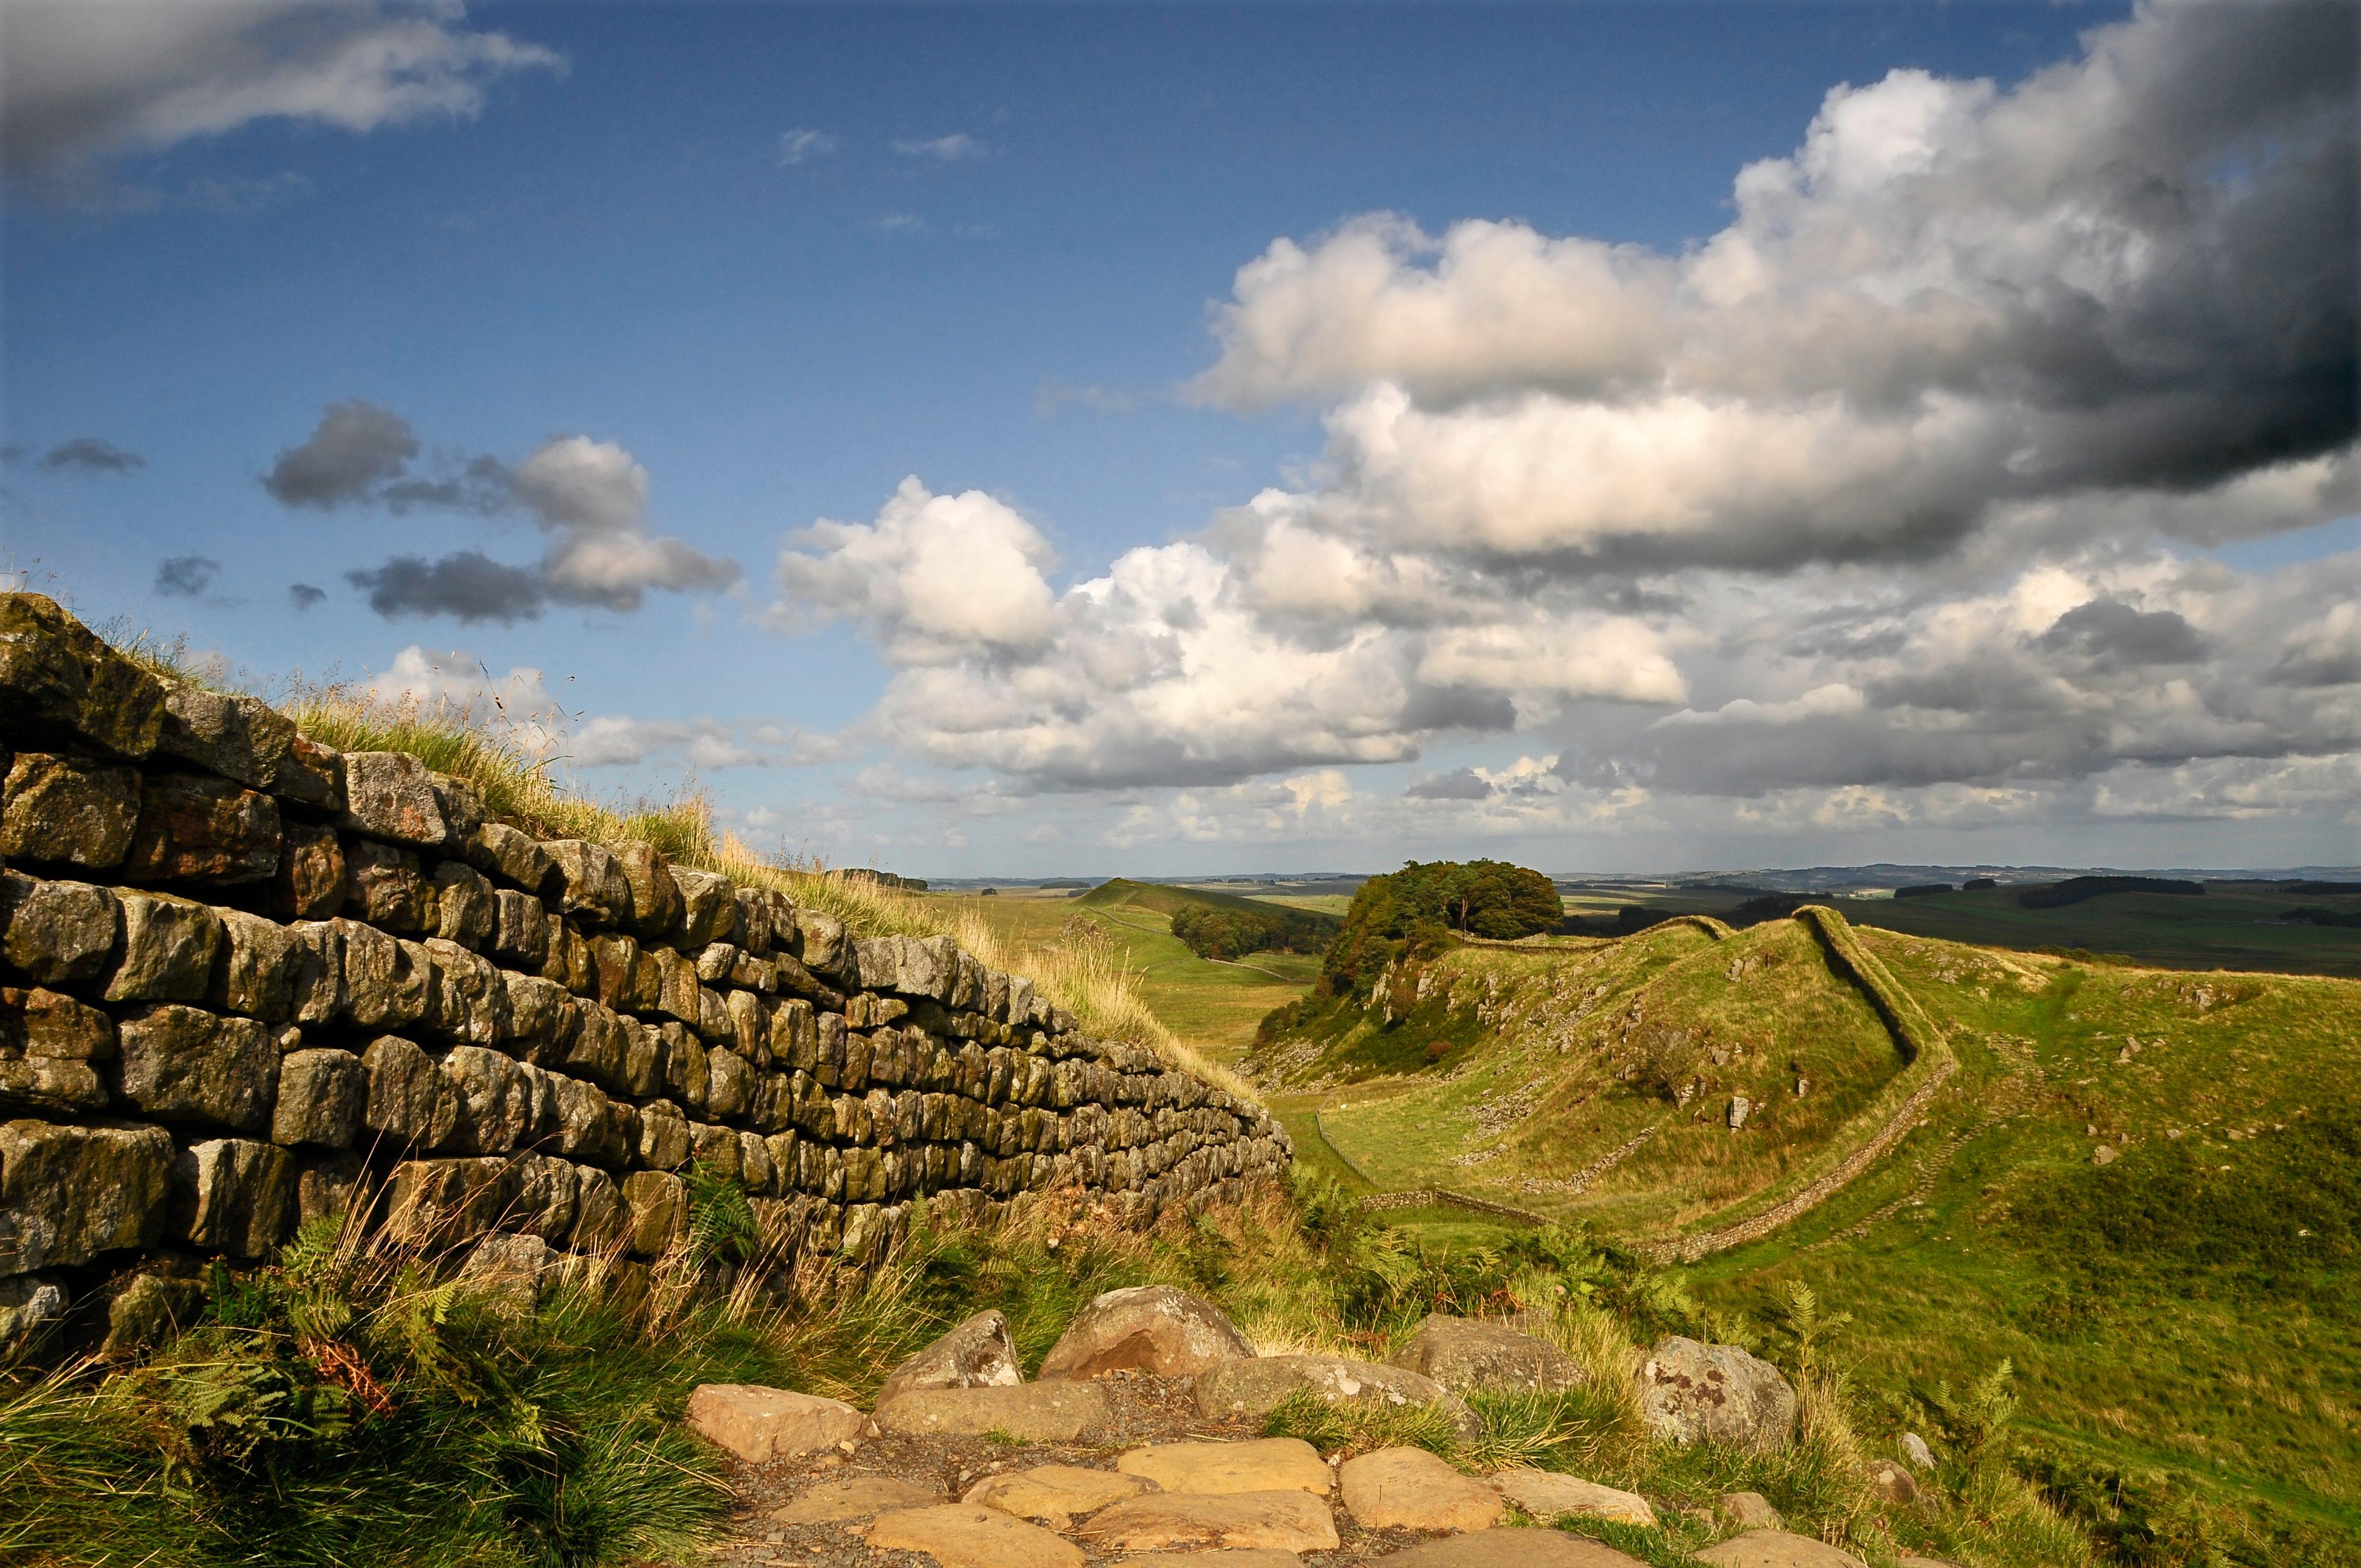 Go on a guided tour of the famous Hadrian's Wall in Edinburgh